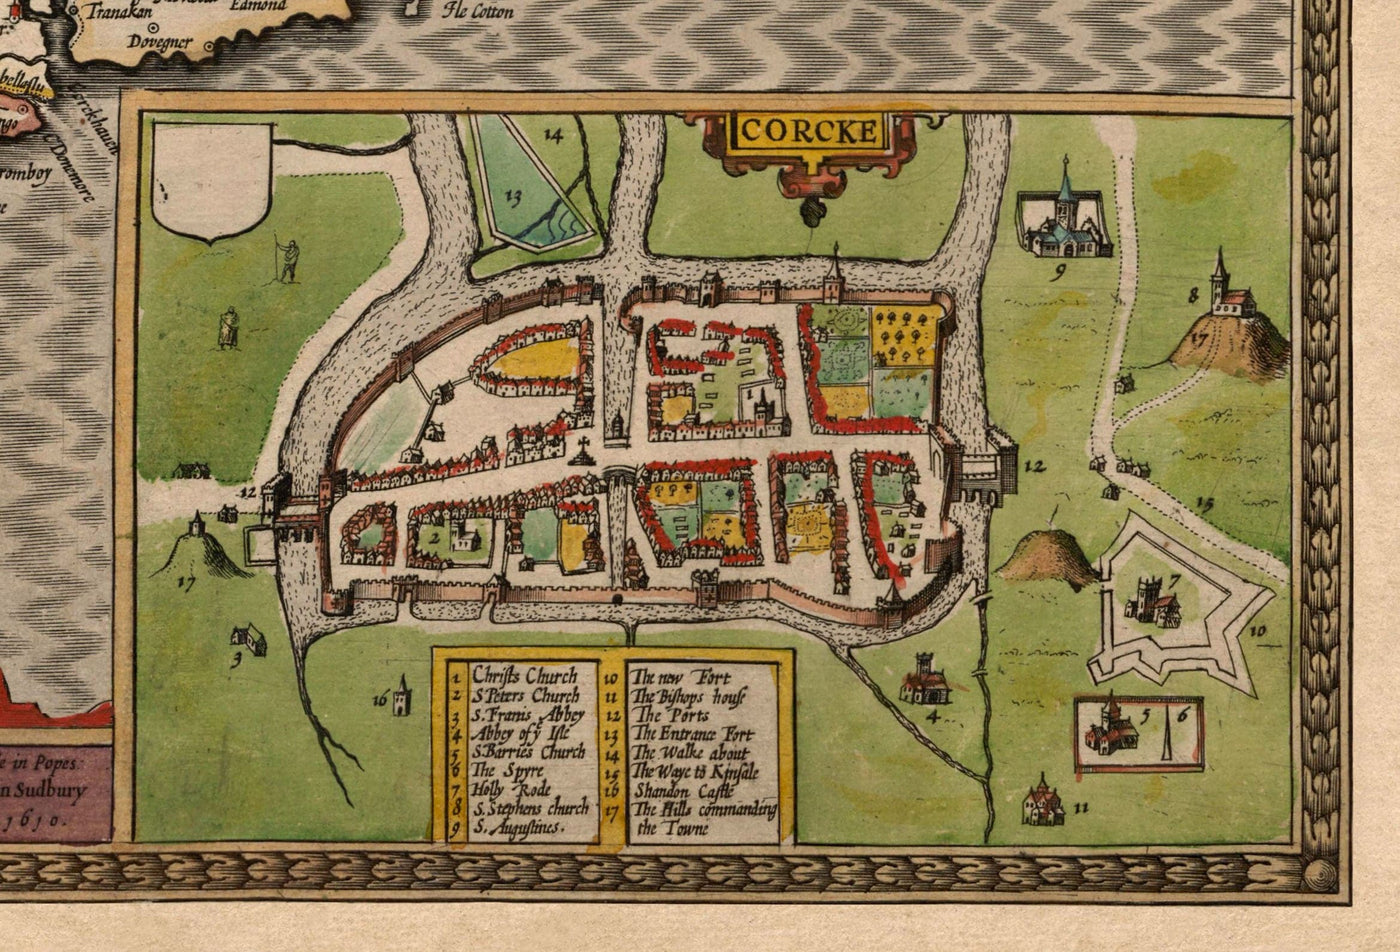 Old Map of Munster, Ireland in 1611 by John Speed - County Cork, Clare, Kerry, Limerick, Tipperary